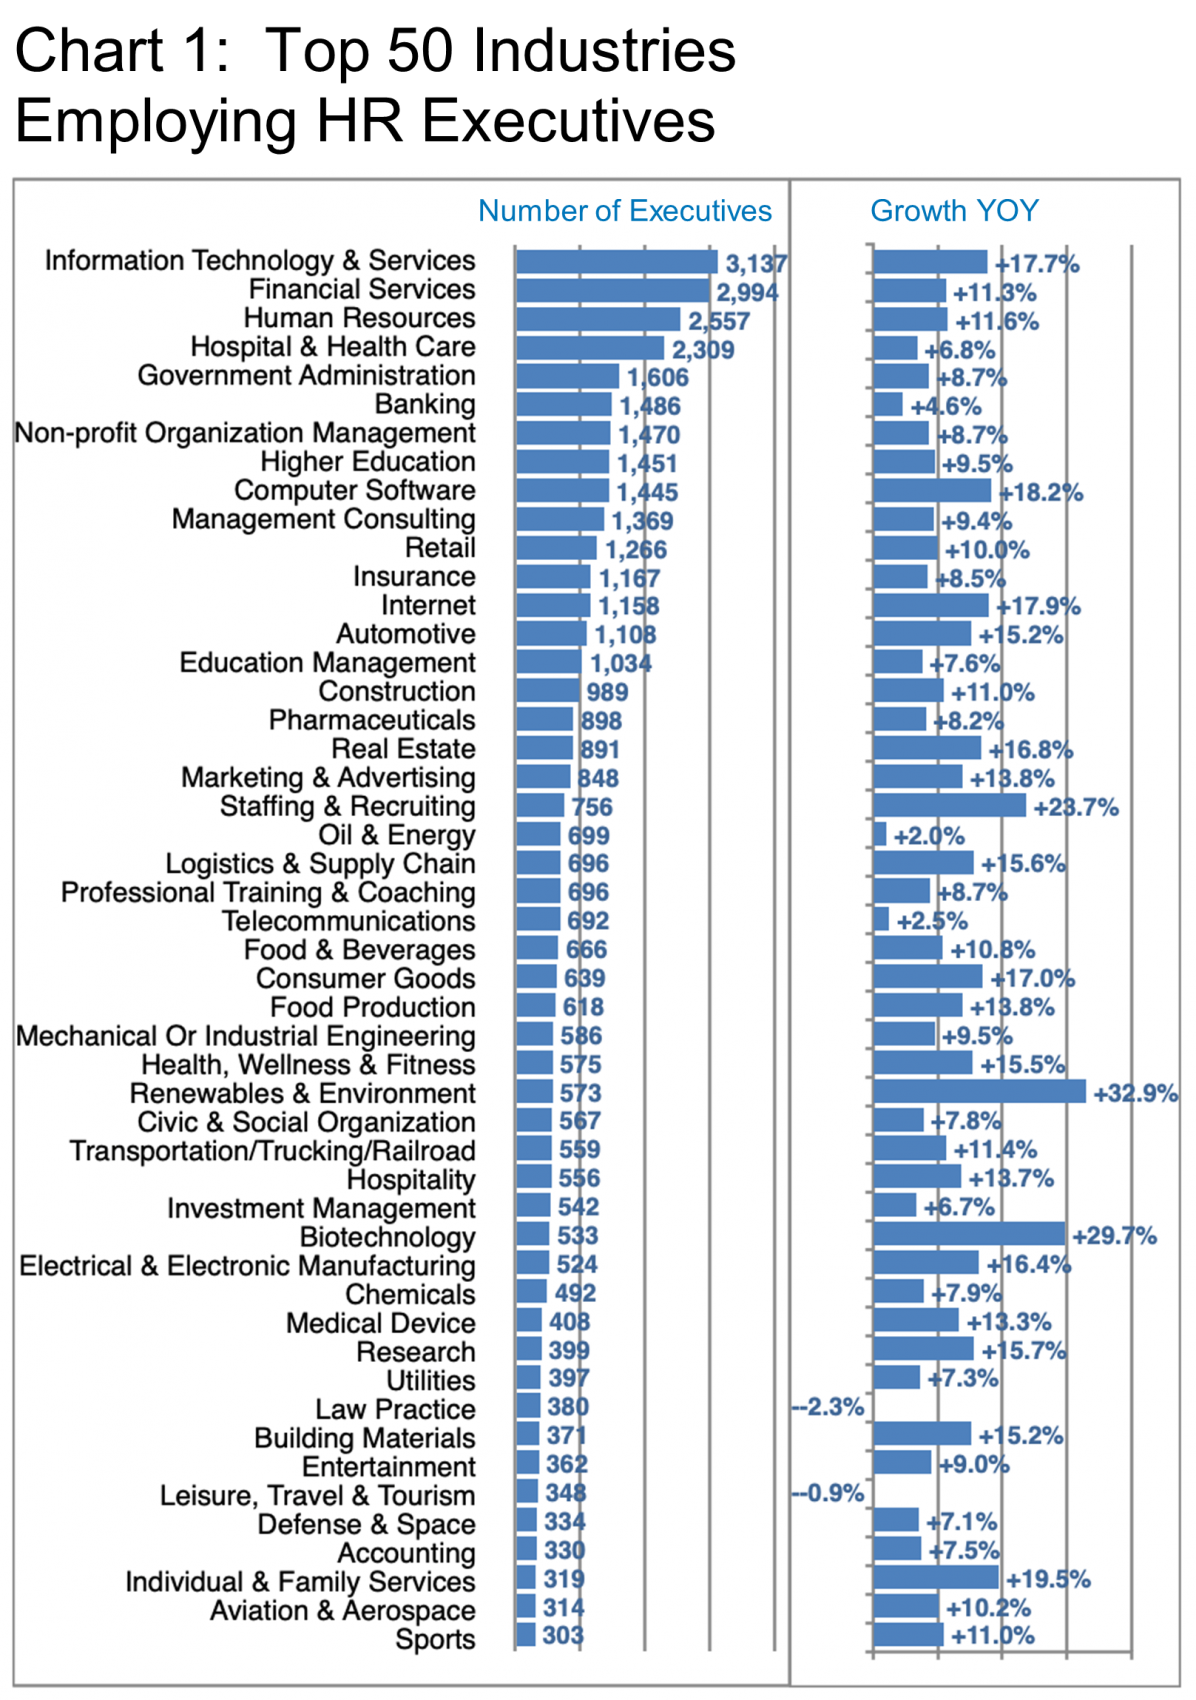 Chart_1_Top 50 Industries Employing HR Executives